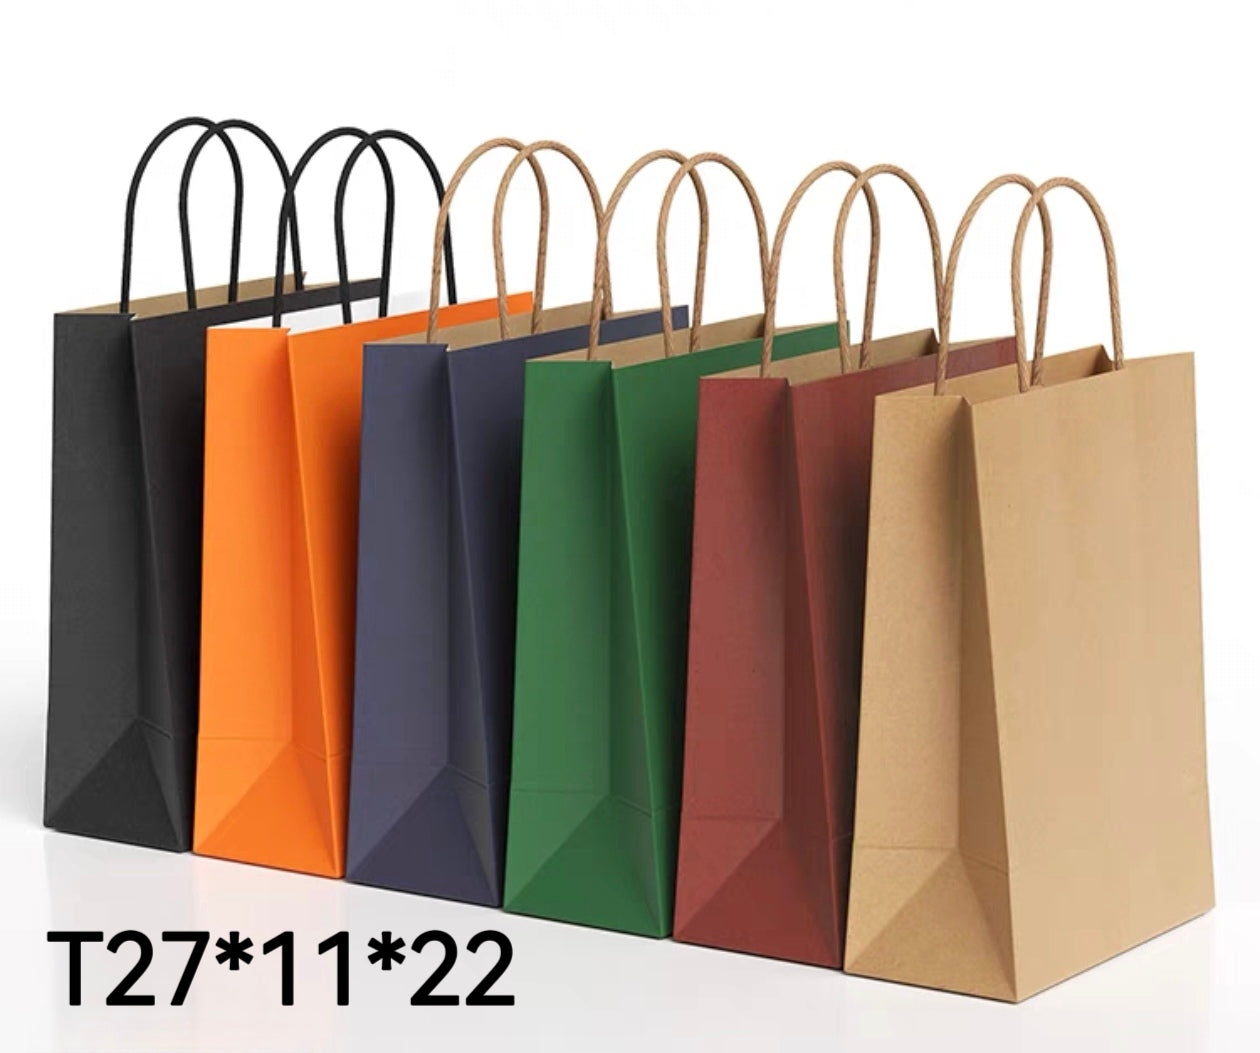 SET OF 24 - Boutique kraft bags (colors of your choice) T22*11*27